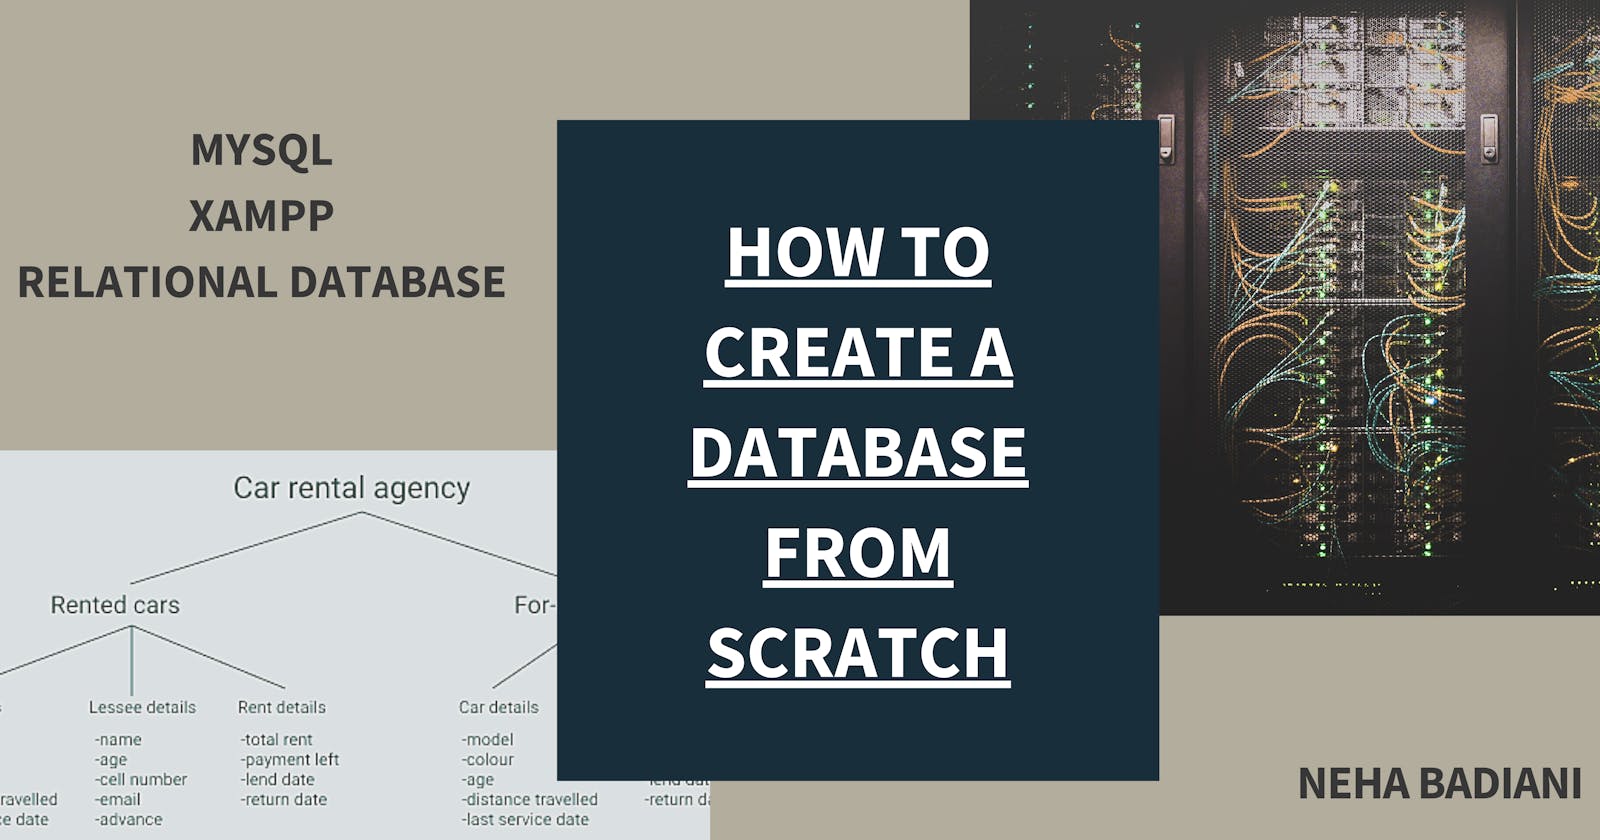 How to create a Database from scratch